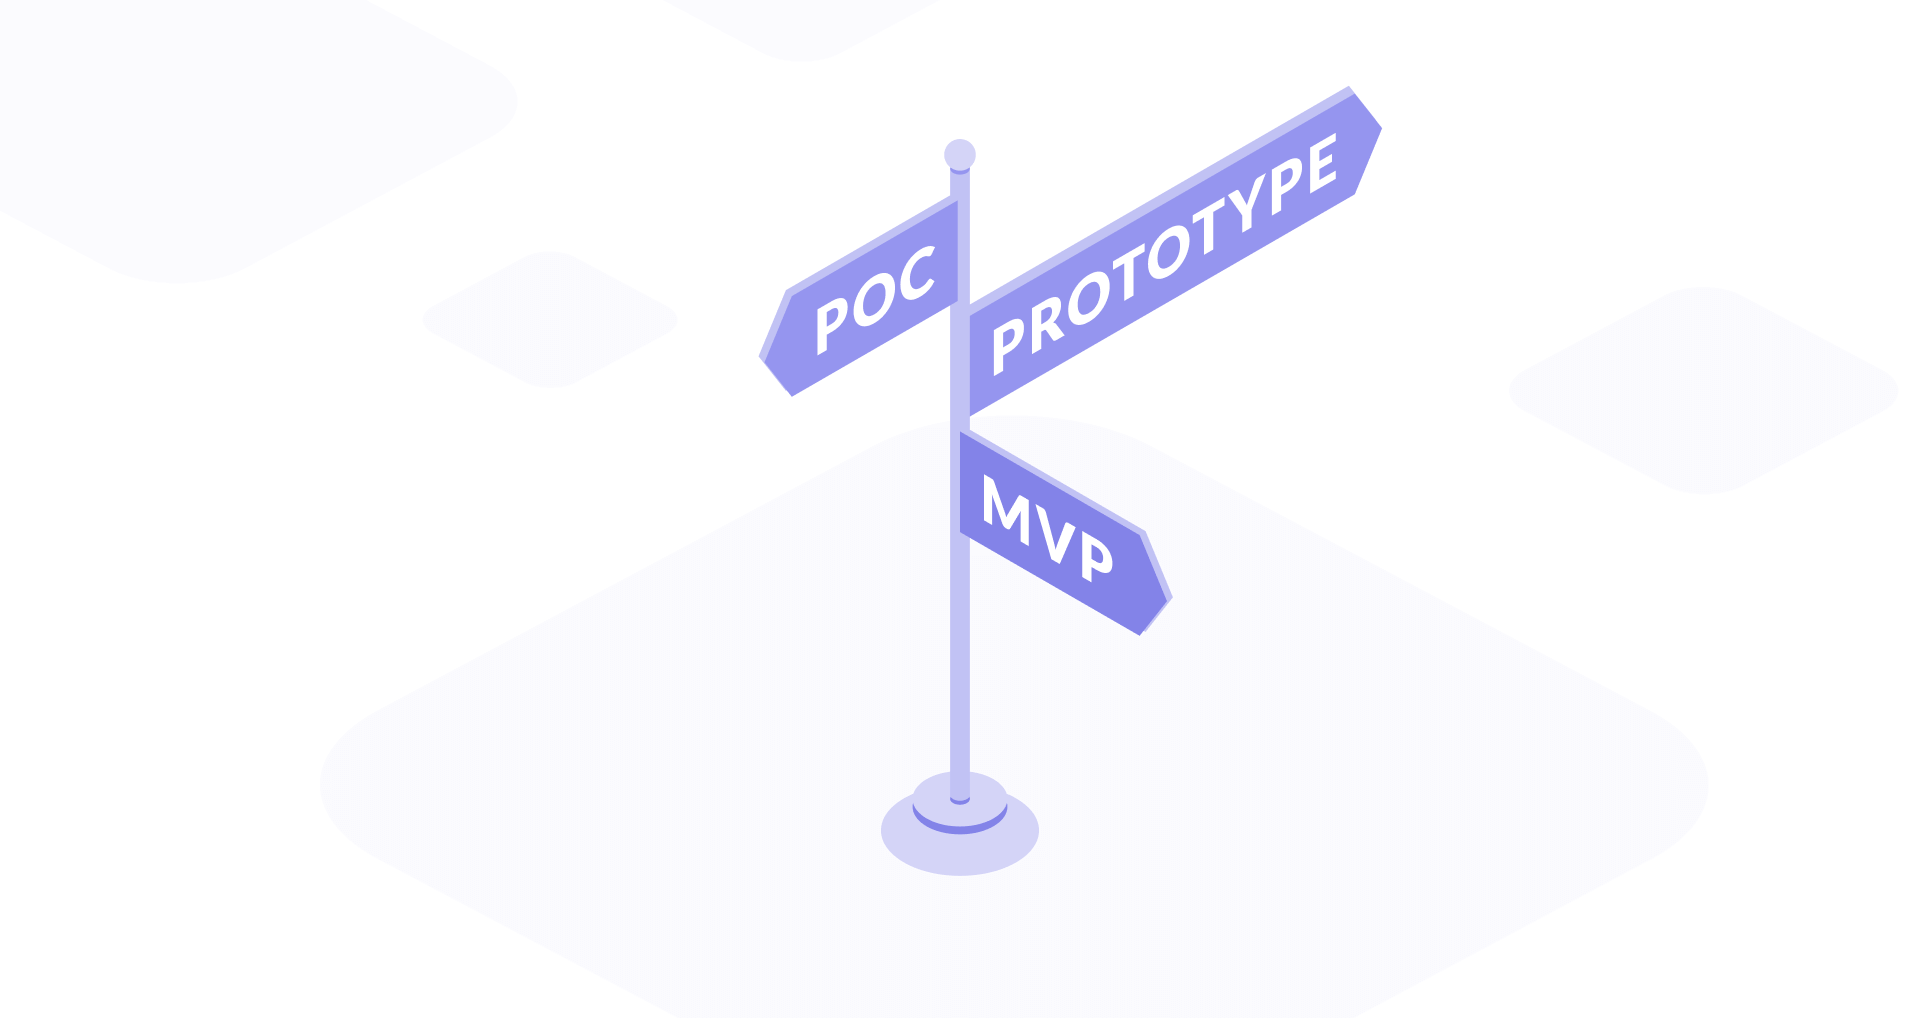 POC Vs MVP Vs Prototype: The Strategy For The Best Product-Market Fit